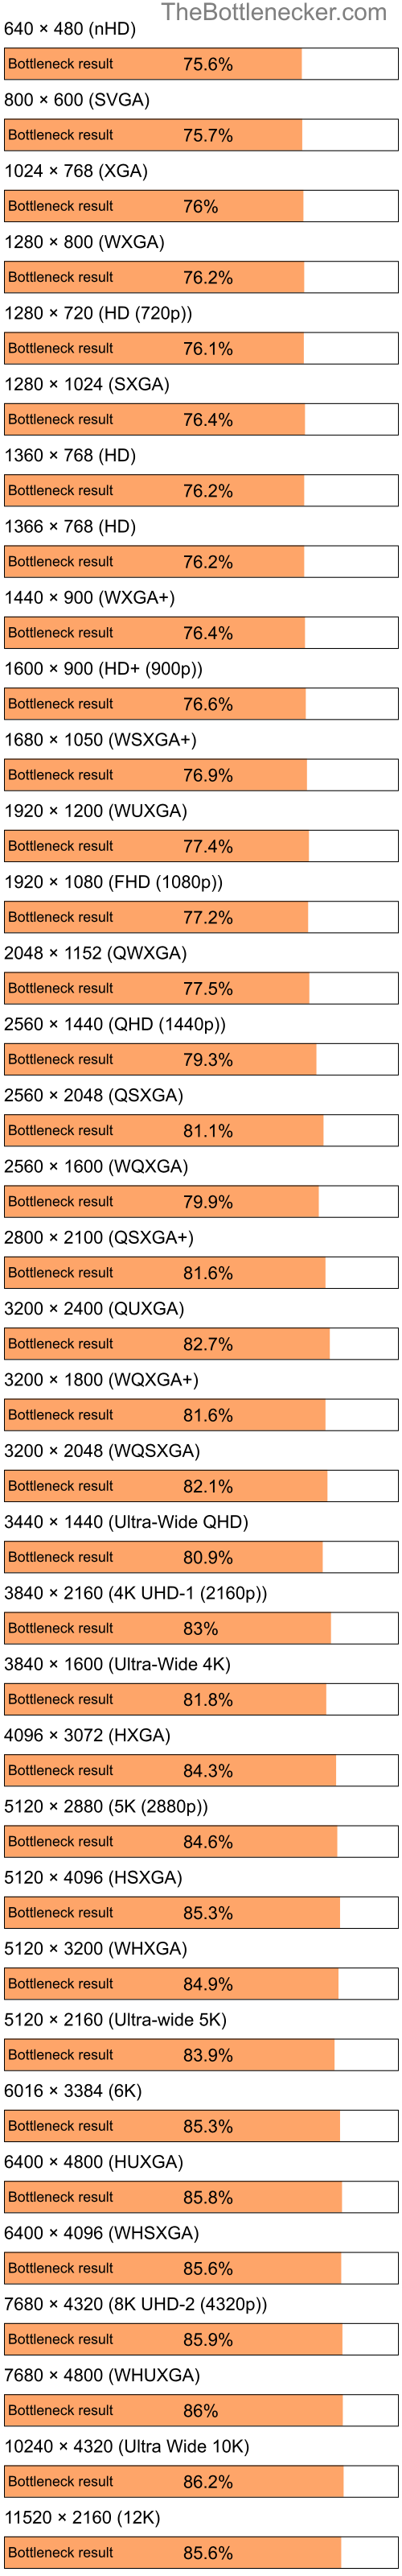 Bottleneck results by resolution for Intel Pentium 4 and AMD Mobility Radeon X1300 in General Tasks